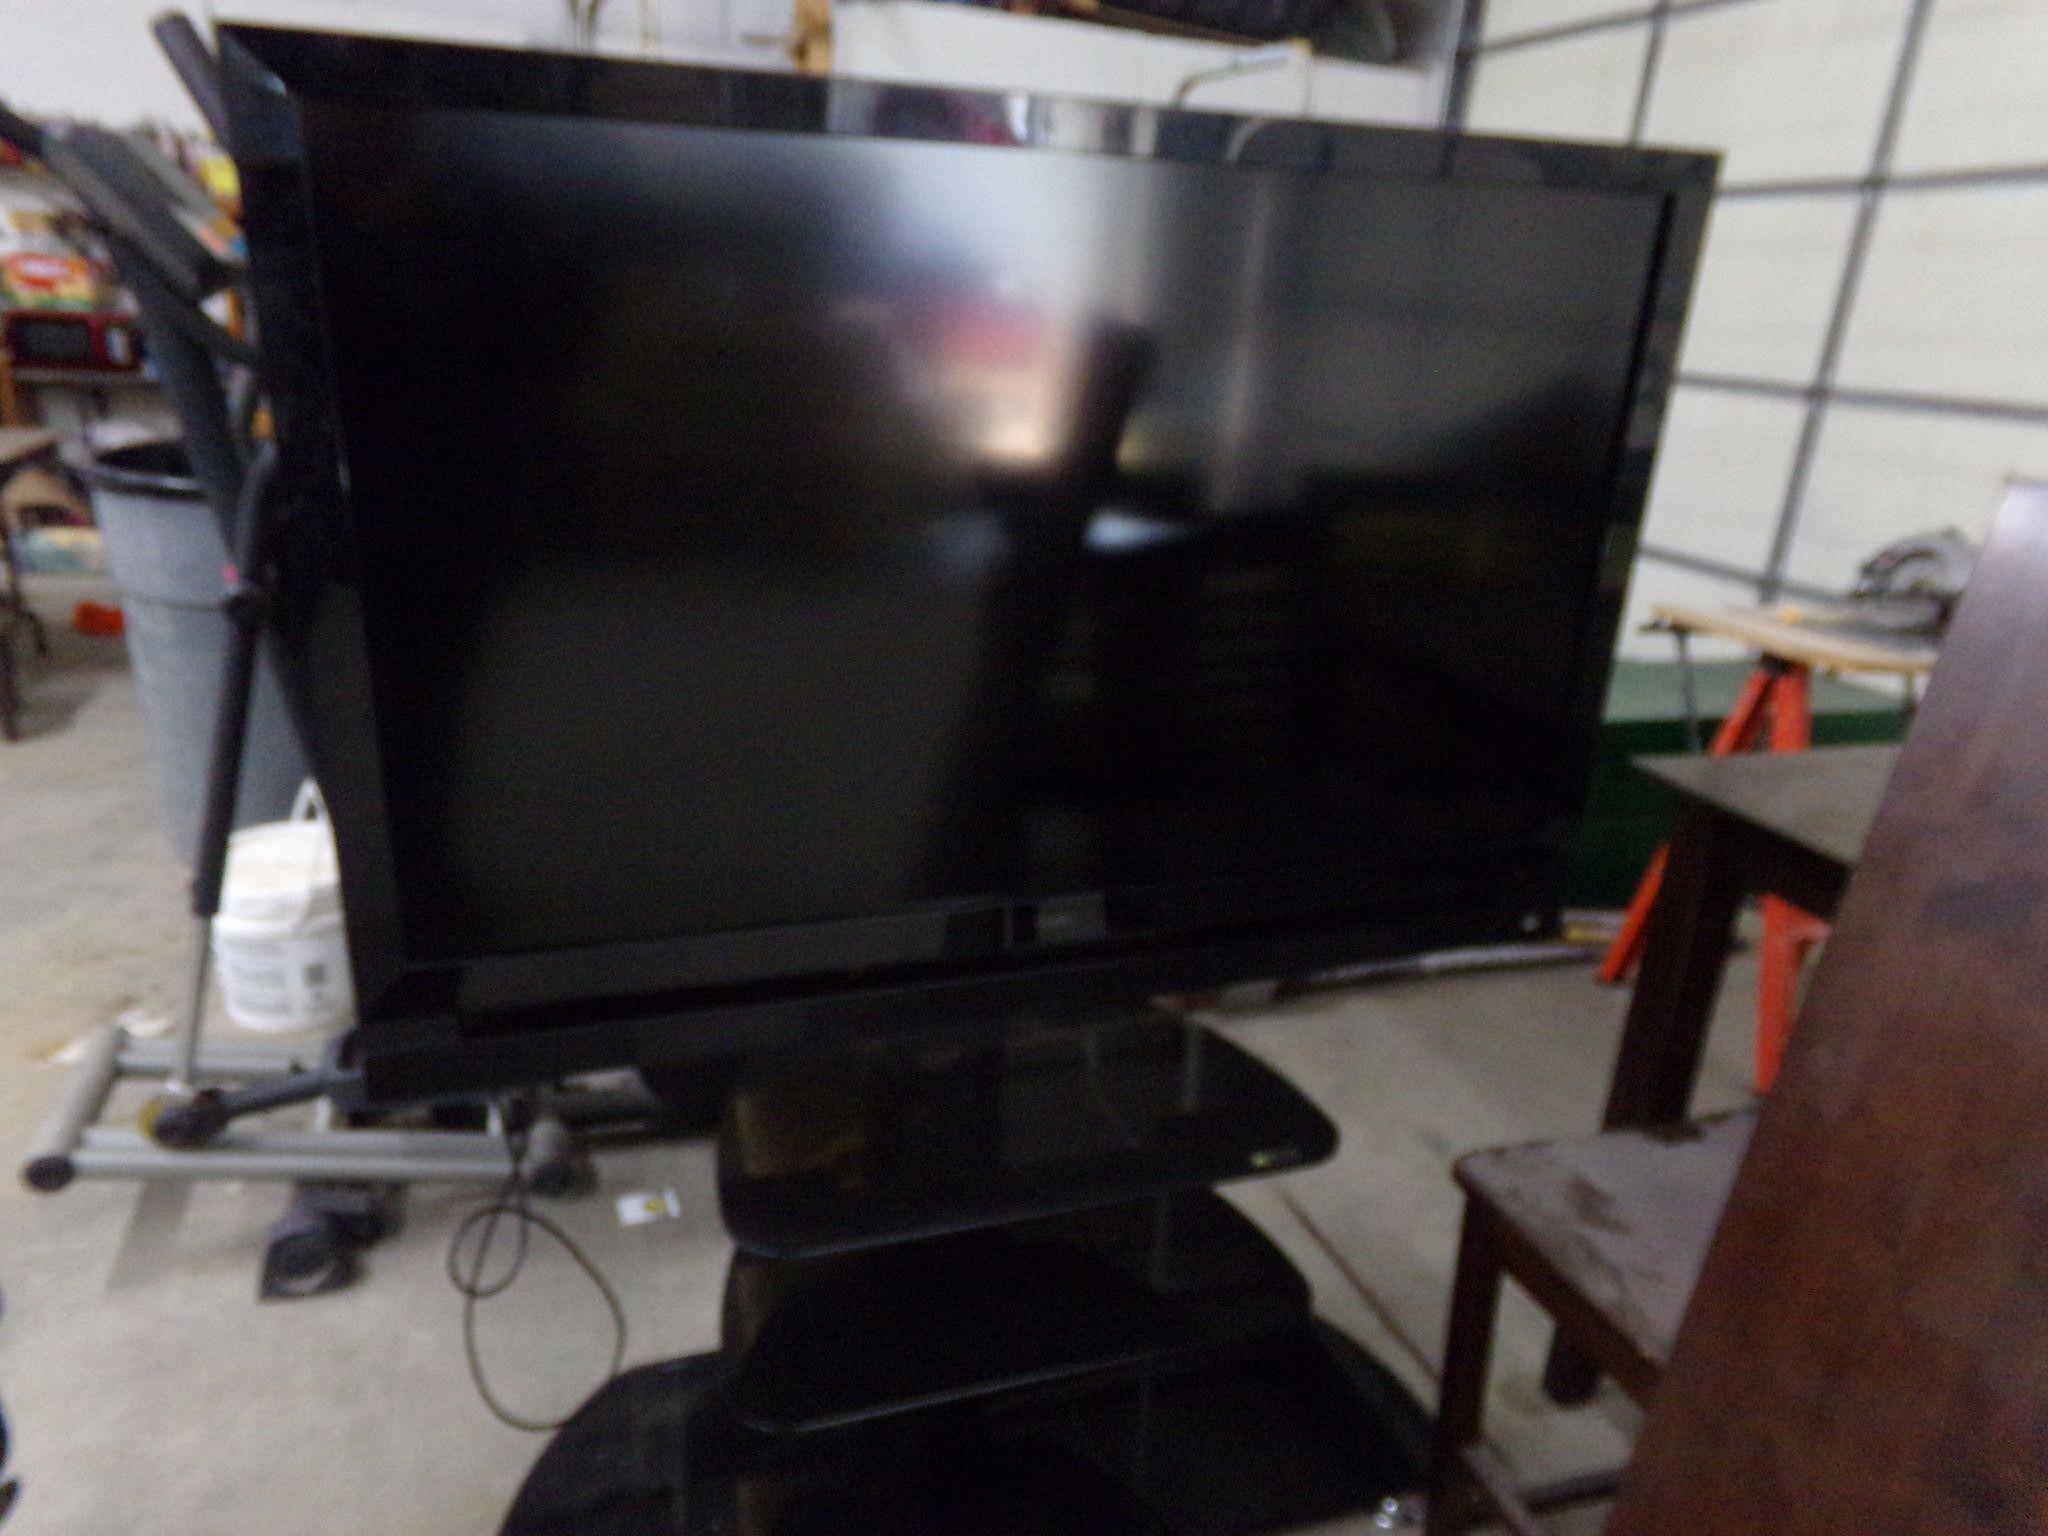 60" Visio TV and stand